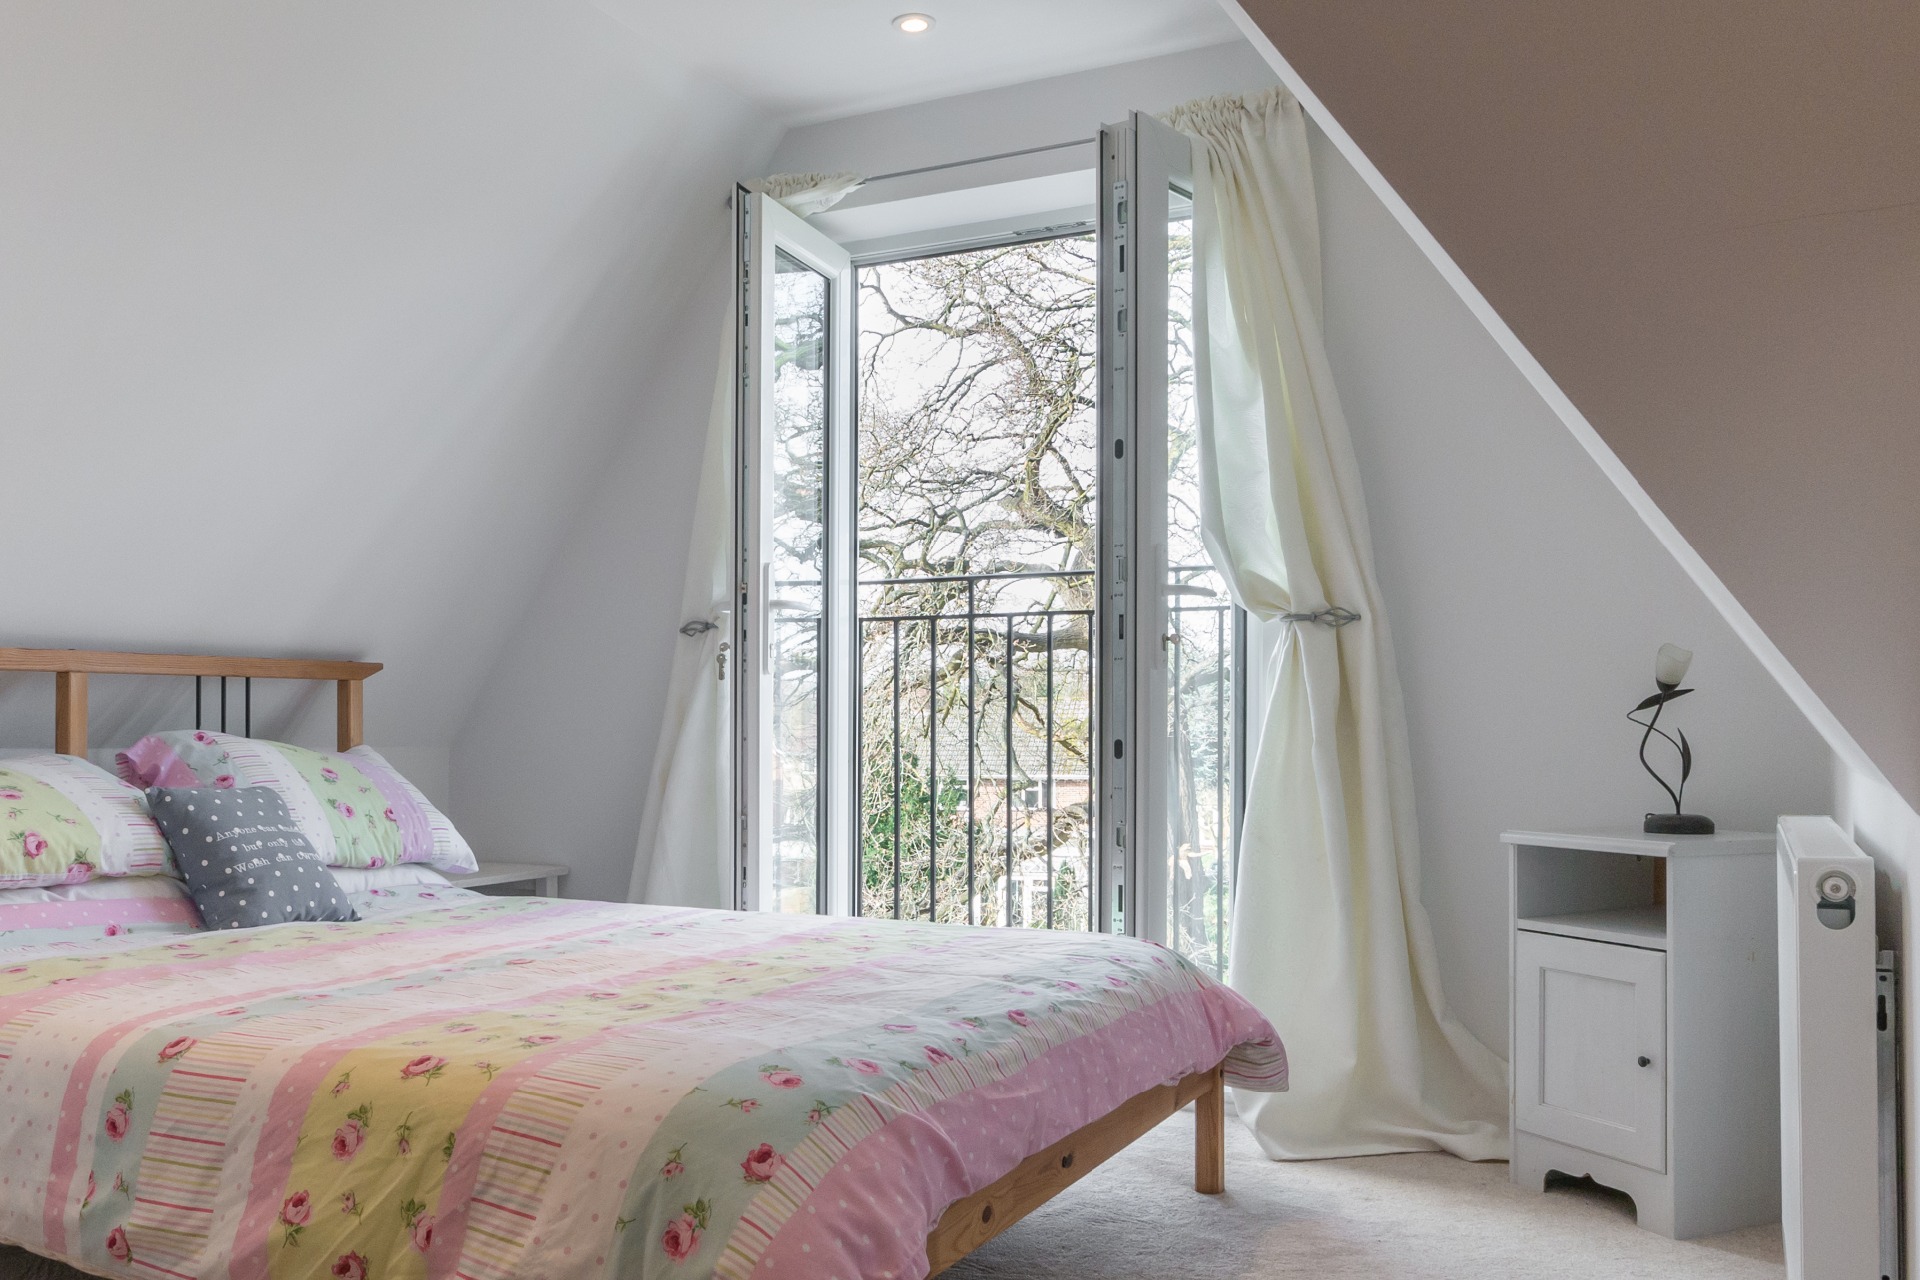 Bedroom in loft conversion with balconet